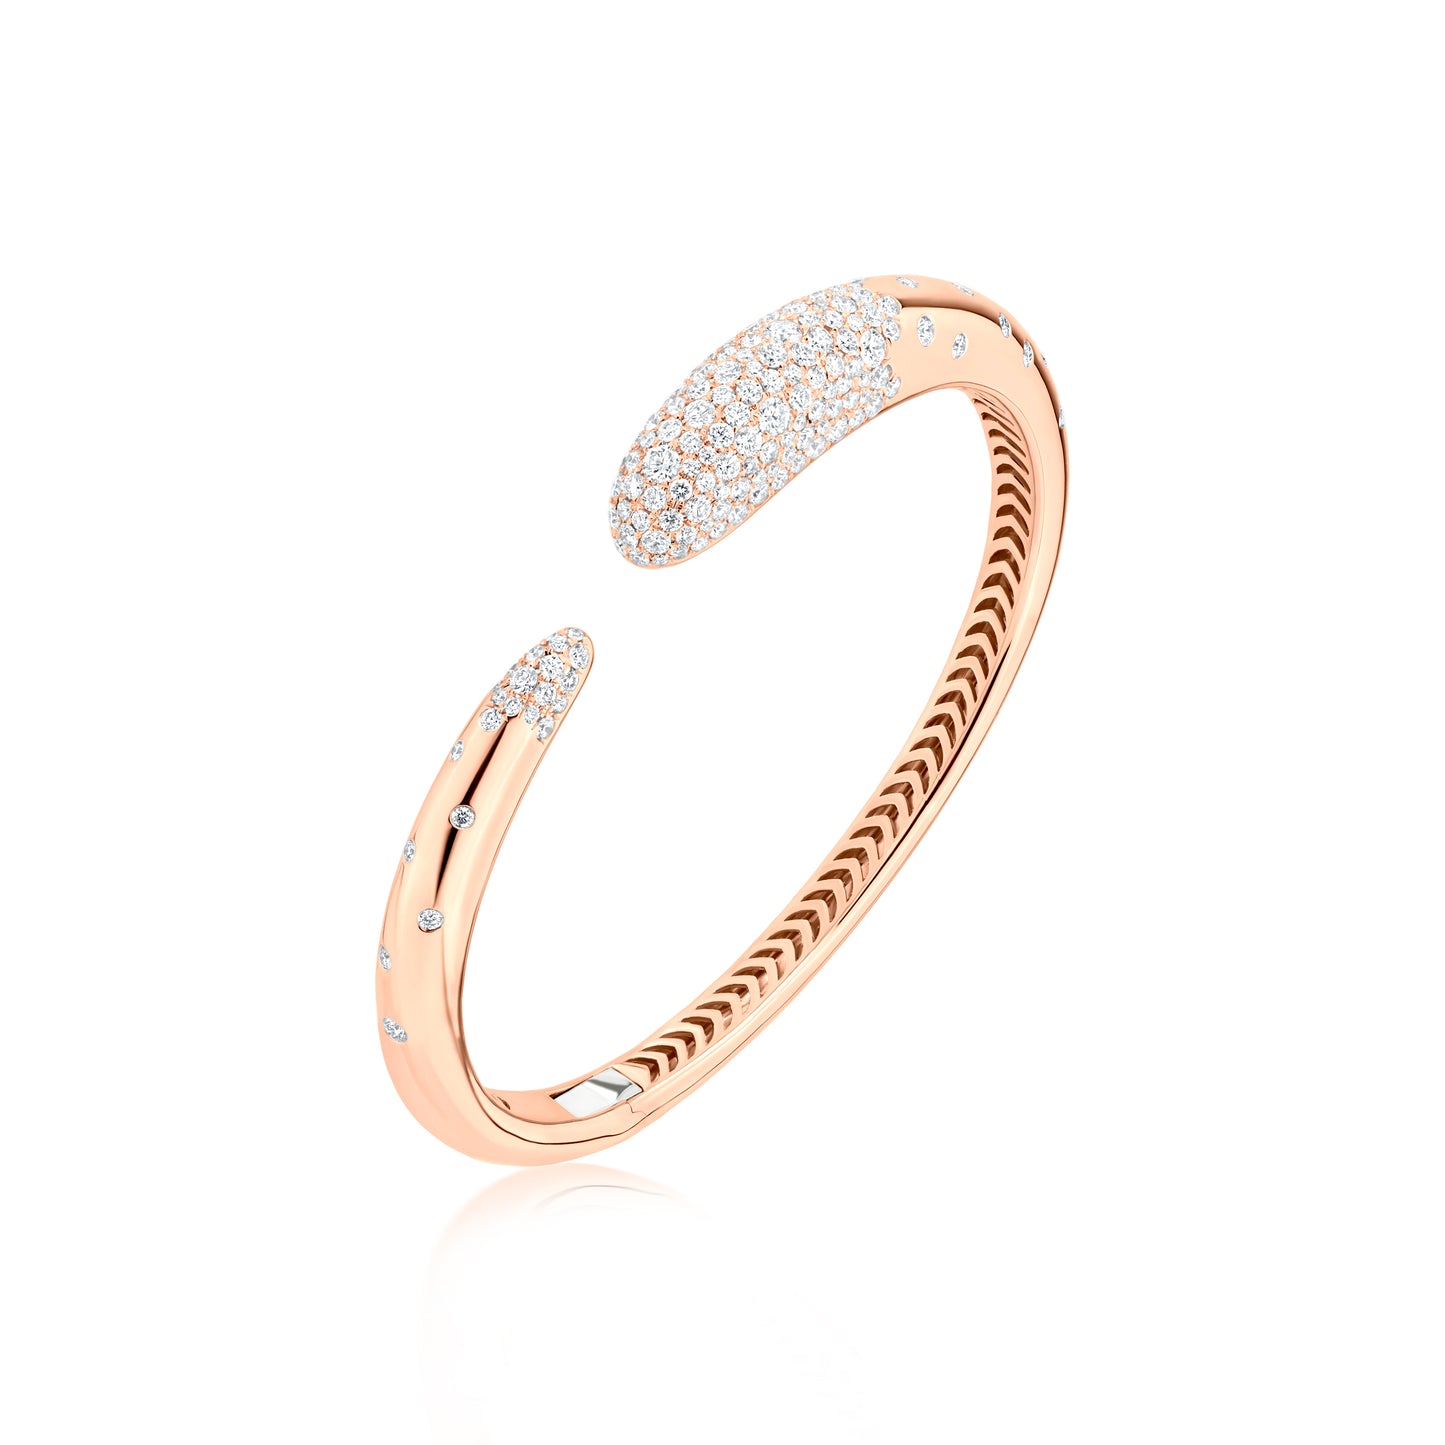 Bangle With Diamond In 18K Rose Gold